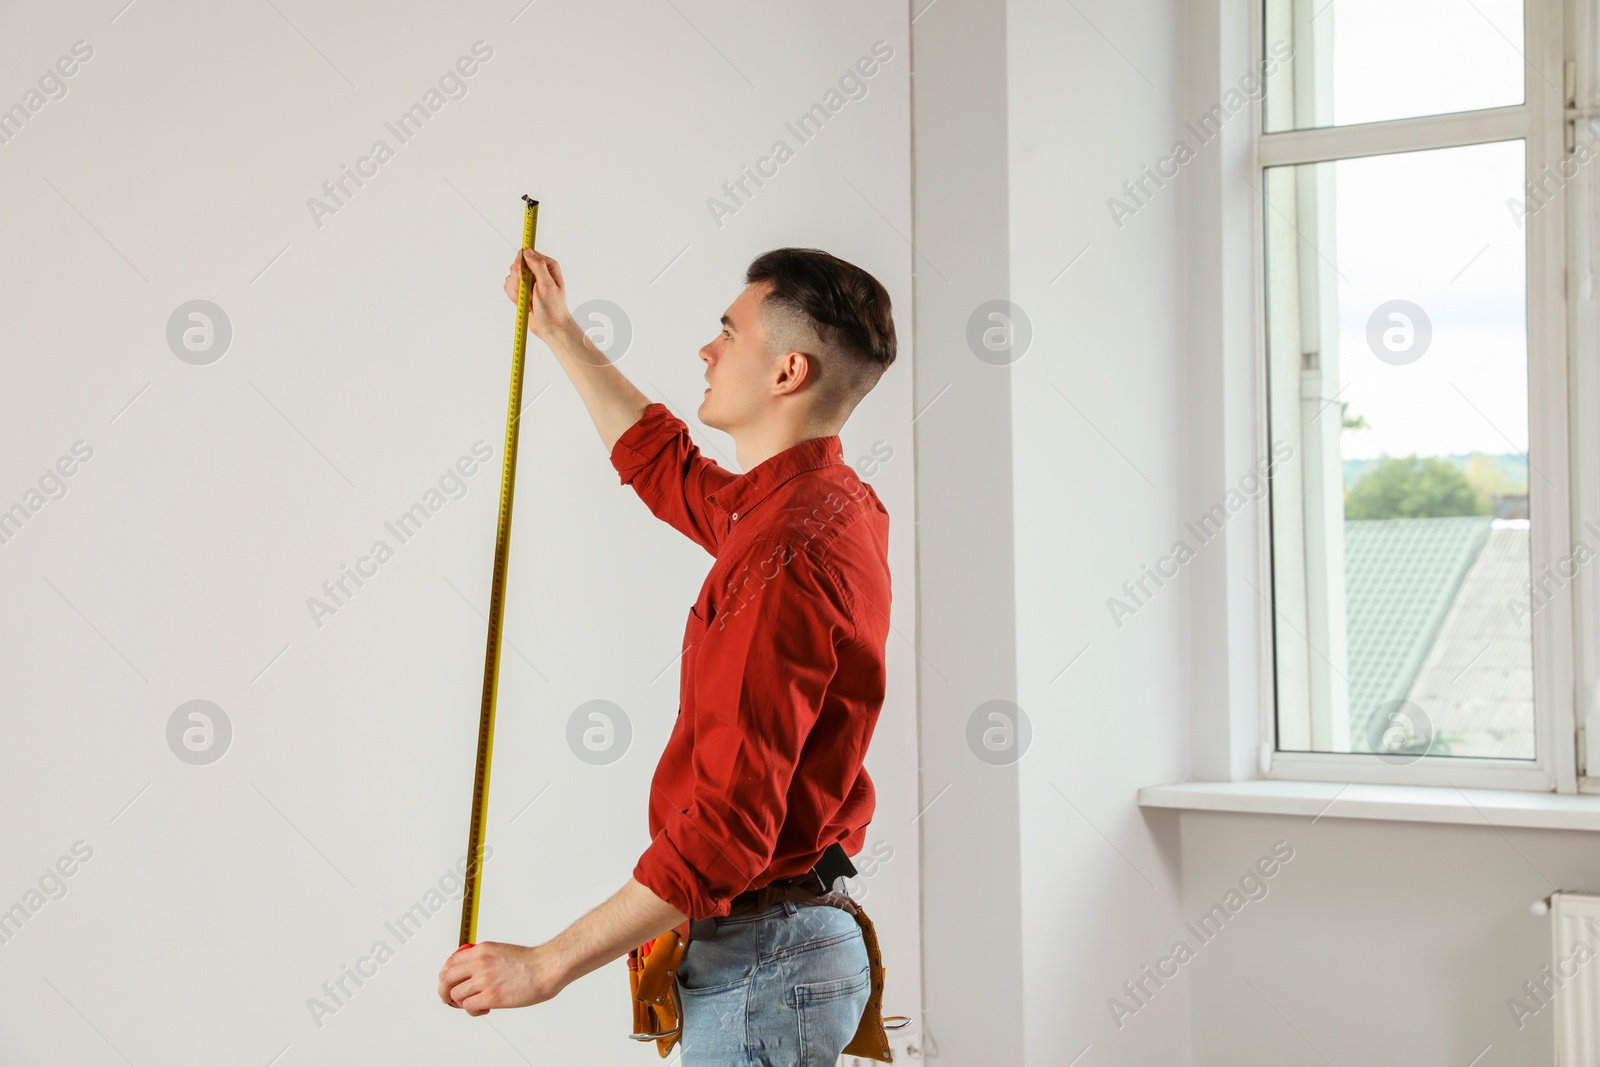 Photo of Handyman with toolbelt and measuring tape working in empty room